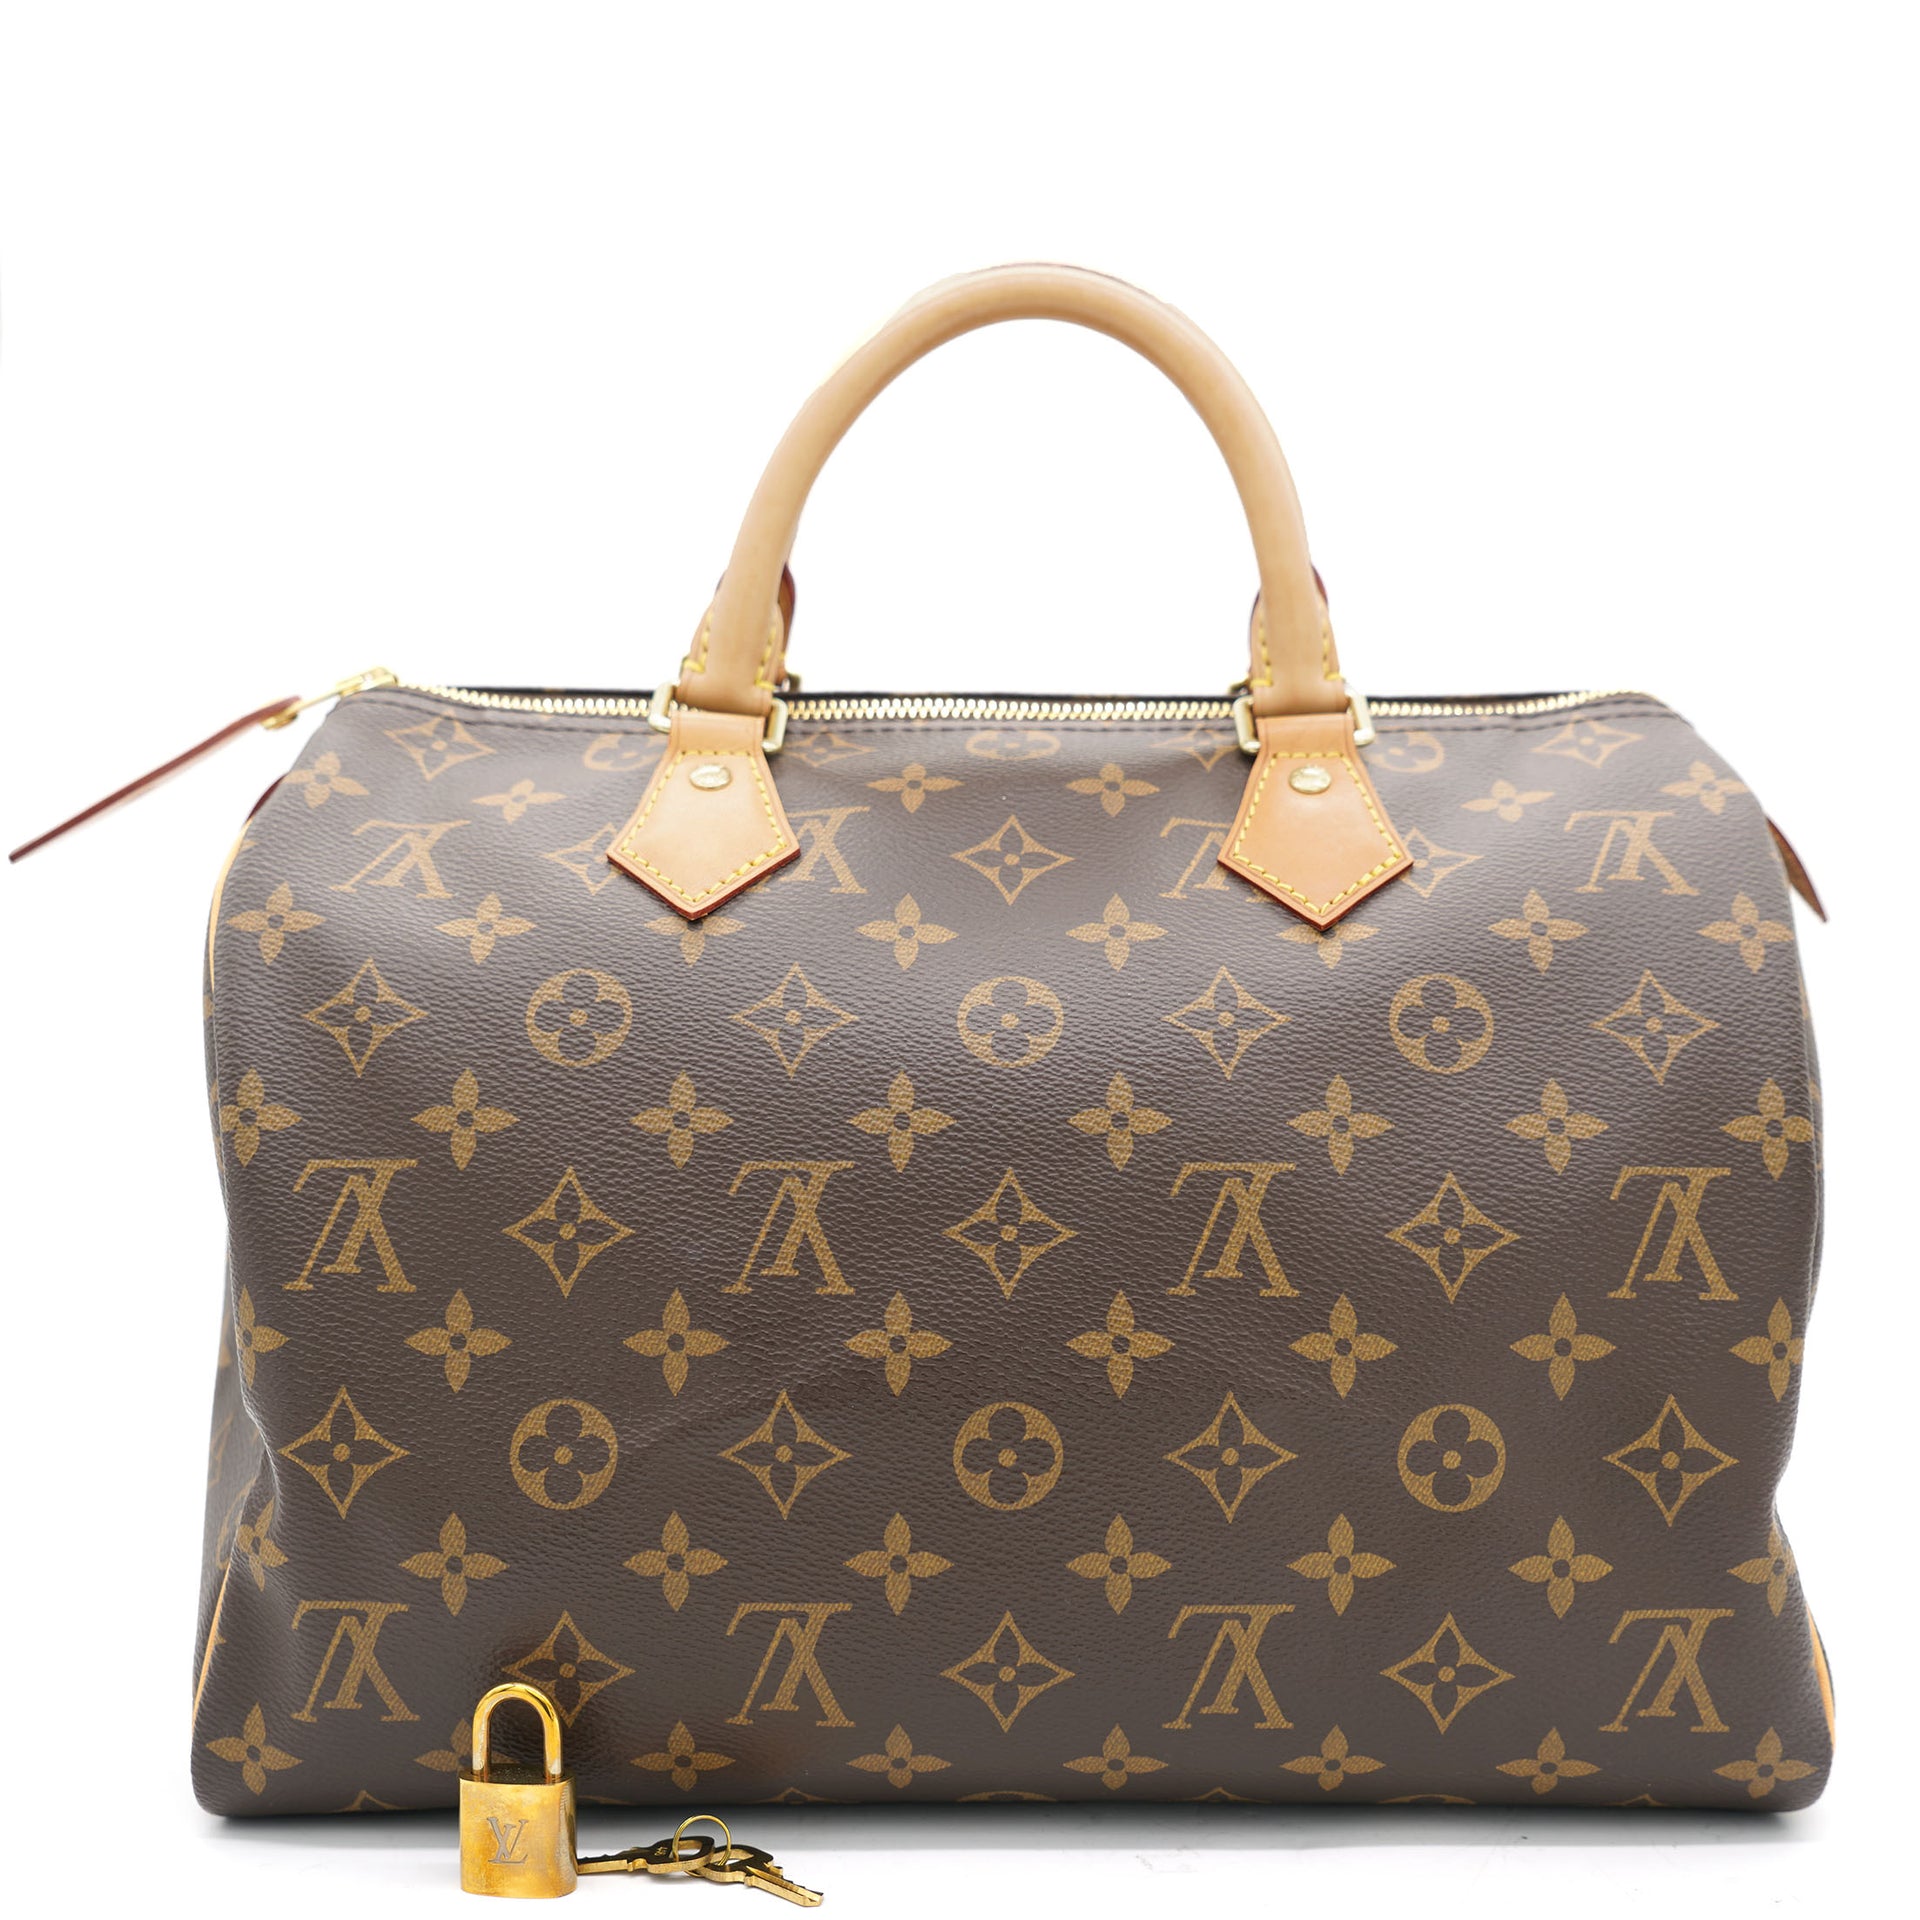 The Greatest Purse in the World- the Louis Vuitton Speedy 30